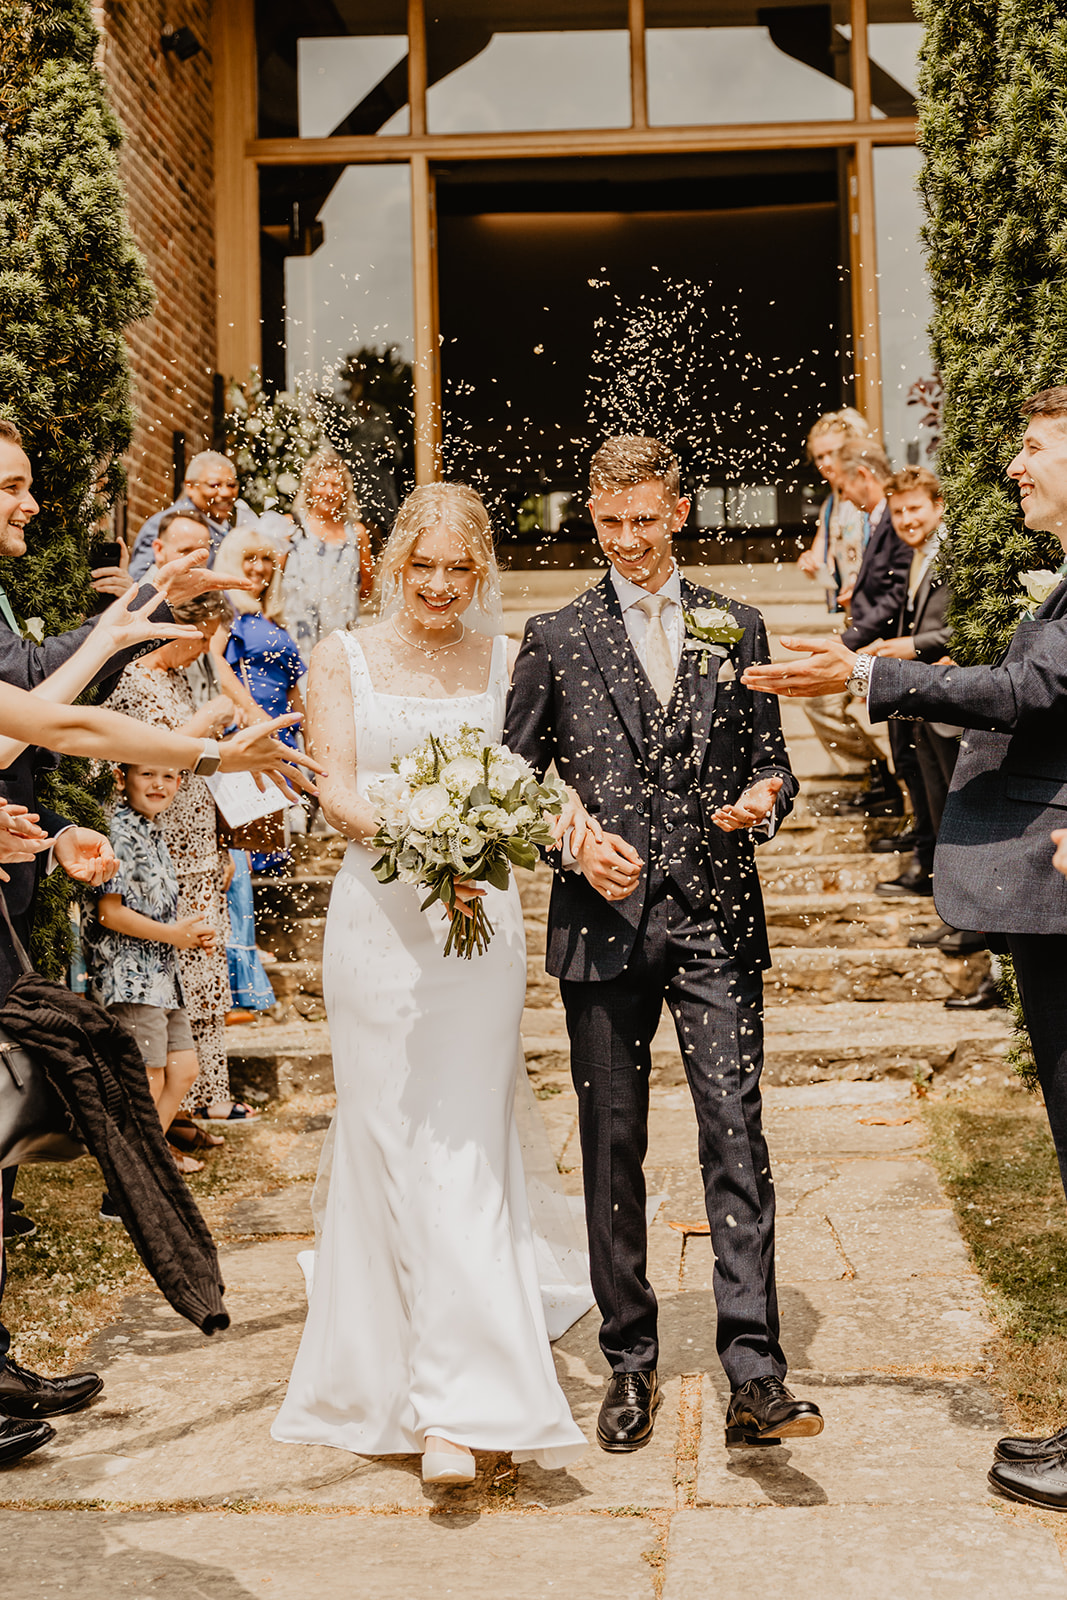 Bride and groom walking under confetti at a Bury Manor Barn Wedding in Sussex. Photographer OliveJoy Photography.